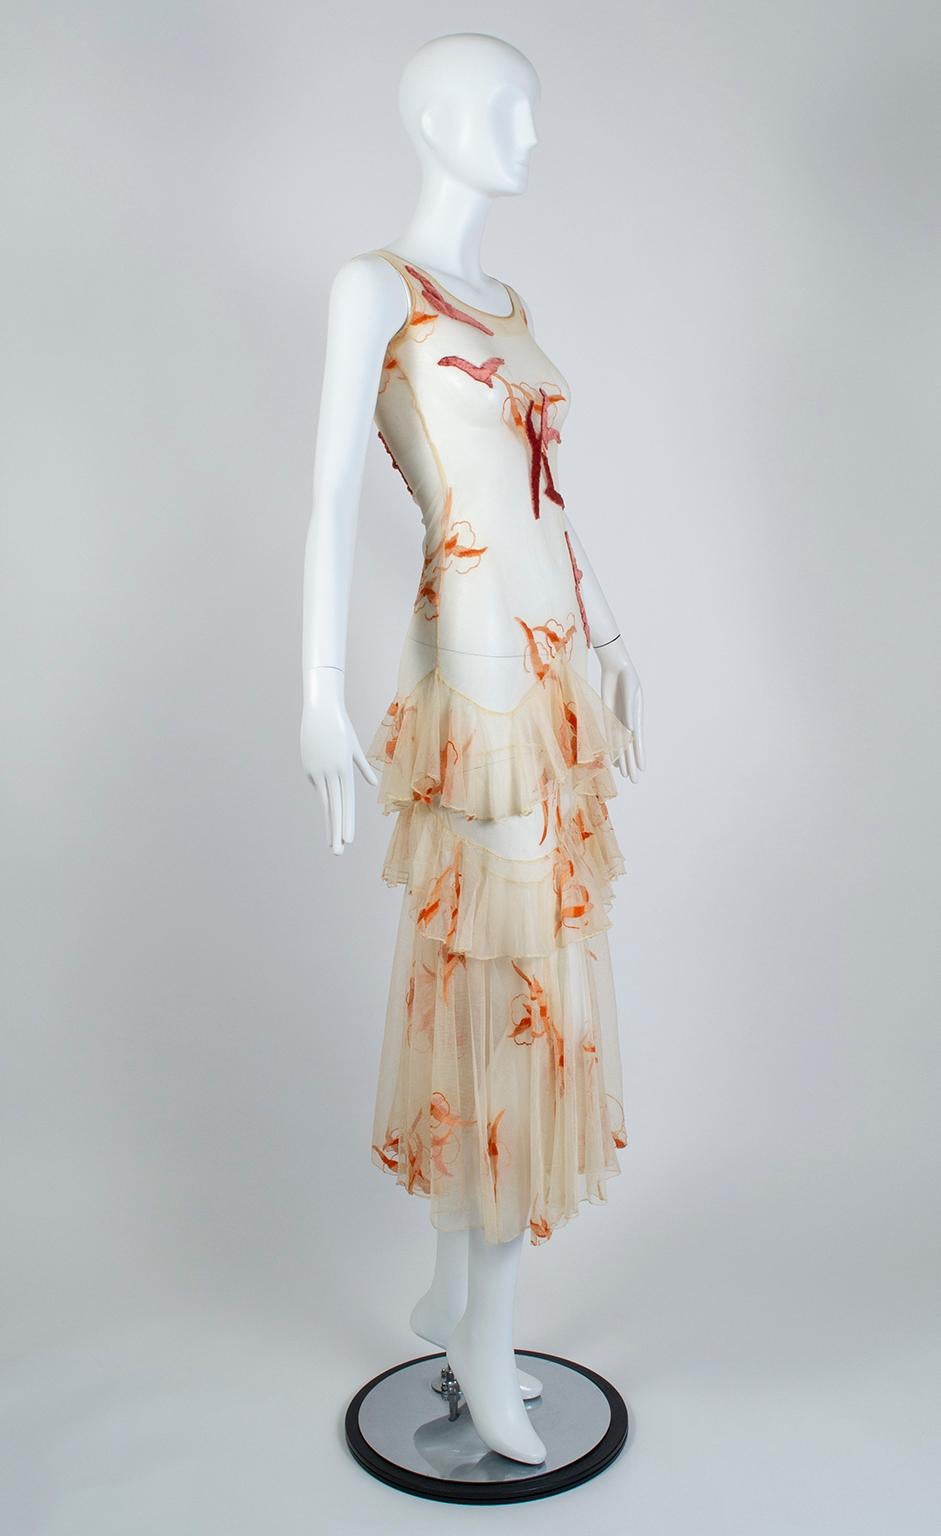 Fully restored, this breathtaking dress recalls the ethereal evening gowns designed by Jeanne Lanvin and Coco Chanel in the late 1920s. Using a skin-tight nude net body stocking as its base, the dress features a skirt with two tiers of ruffles sewn